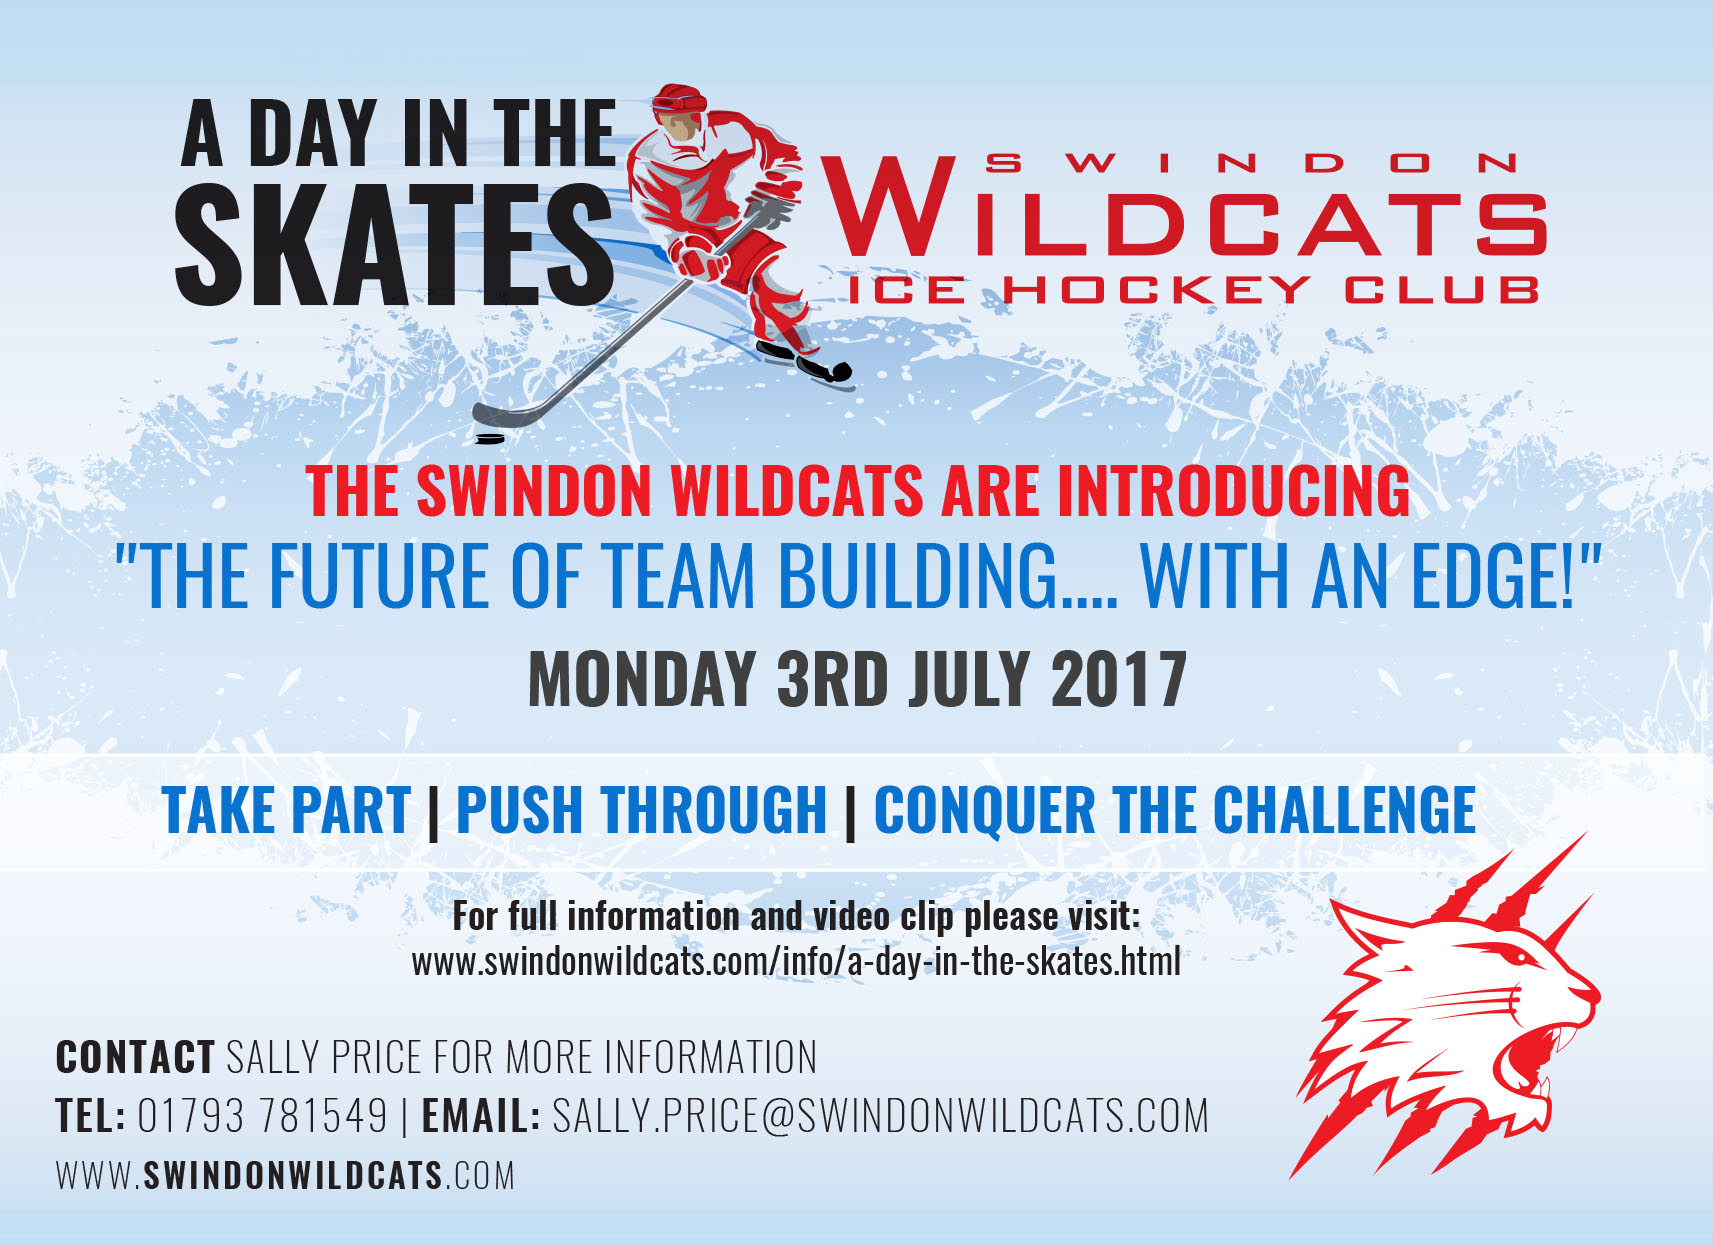 Experience 'A Day In The Skates' With Swindon Wildcats Corporate Away Day